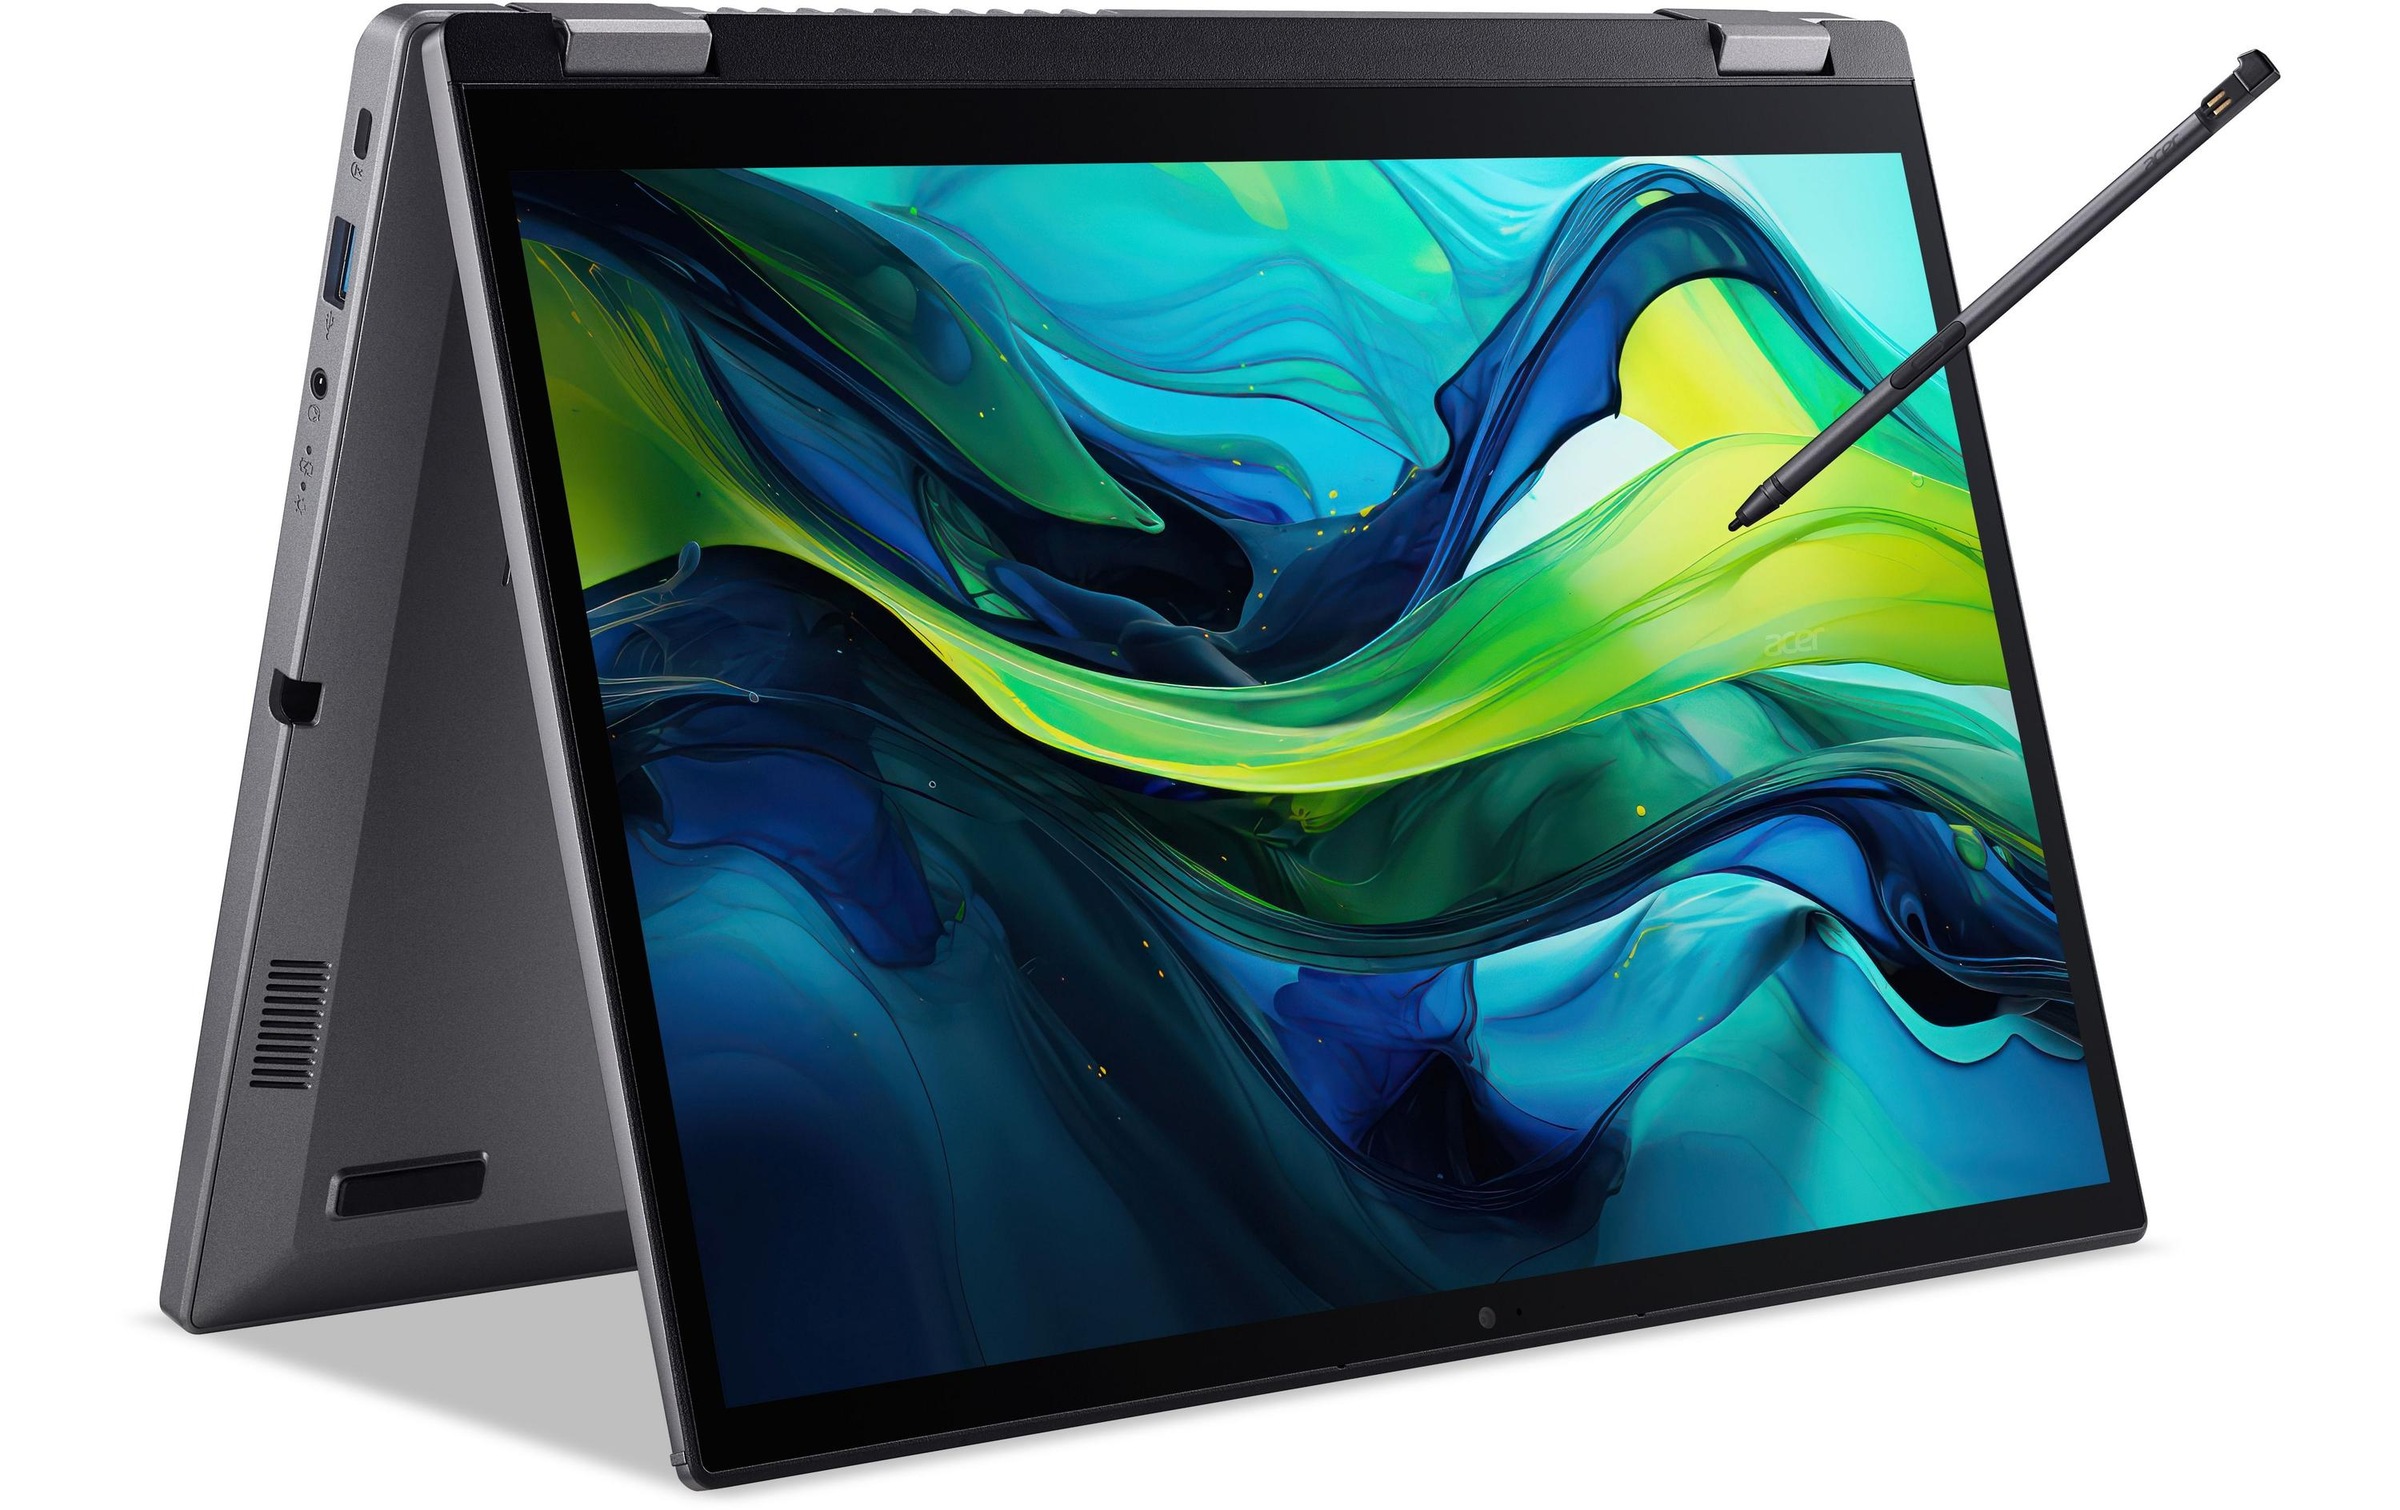 Notebook »Spin 14 (ASP14-51MTN-743K) Touch«, 35,42 cm, / 14 Zoll, Intel, Core 7, 1000...